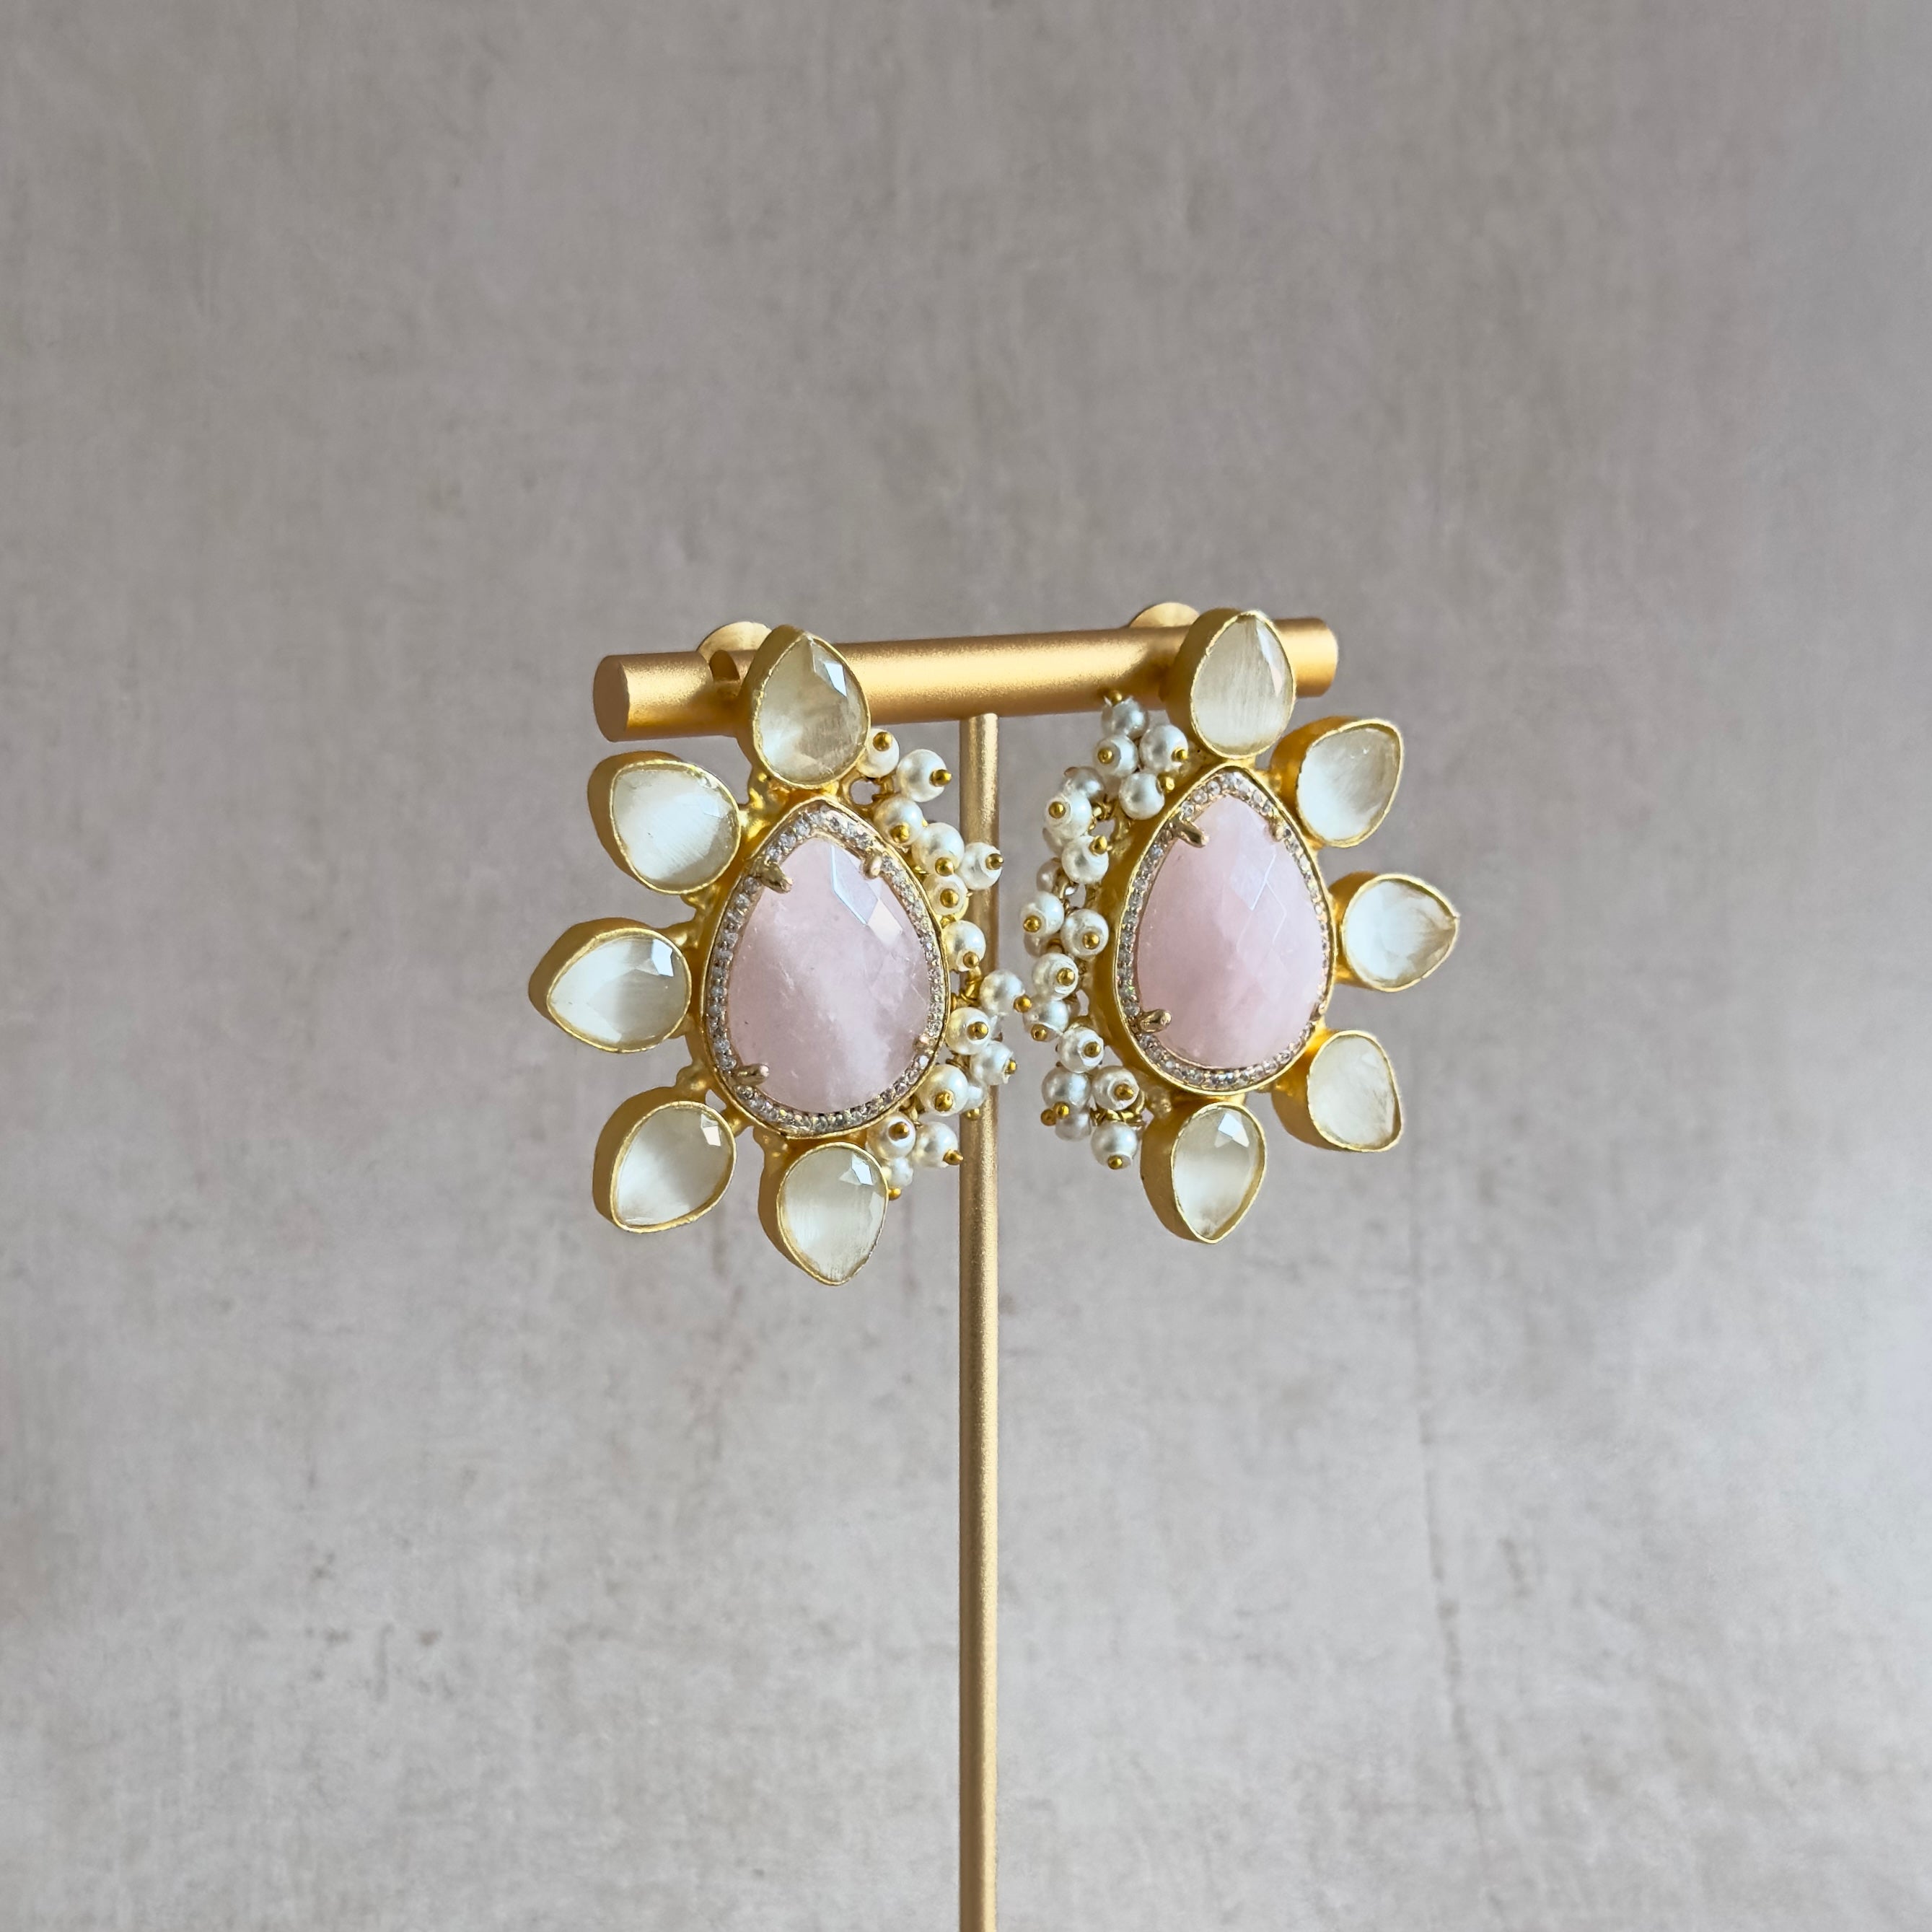 Add a pop of color to your outfit with our Amara Pink Stud Earrings! These statement studs feature stunning hues of pink and grey, sure to make a bold statement. Elevate your accessory game and stand out from the crowd with these eye-catching earrings.